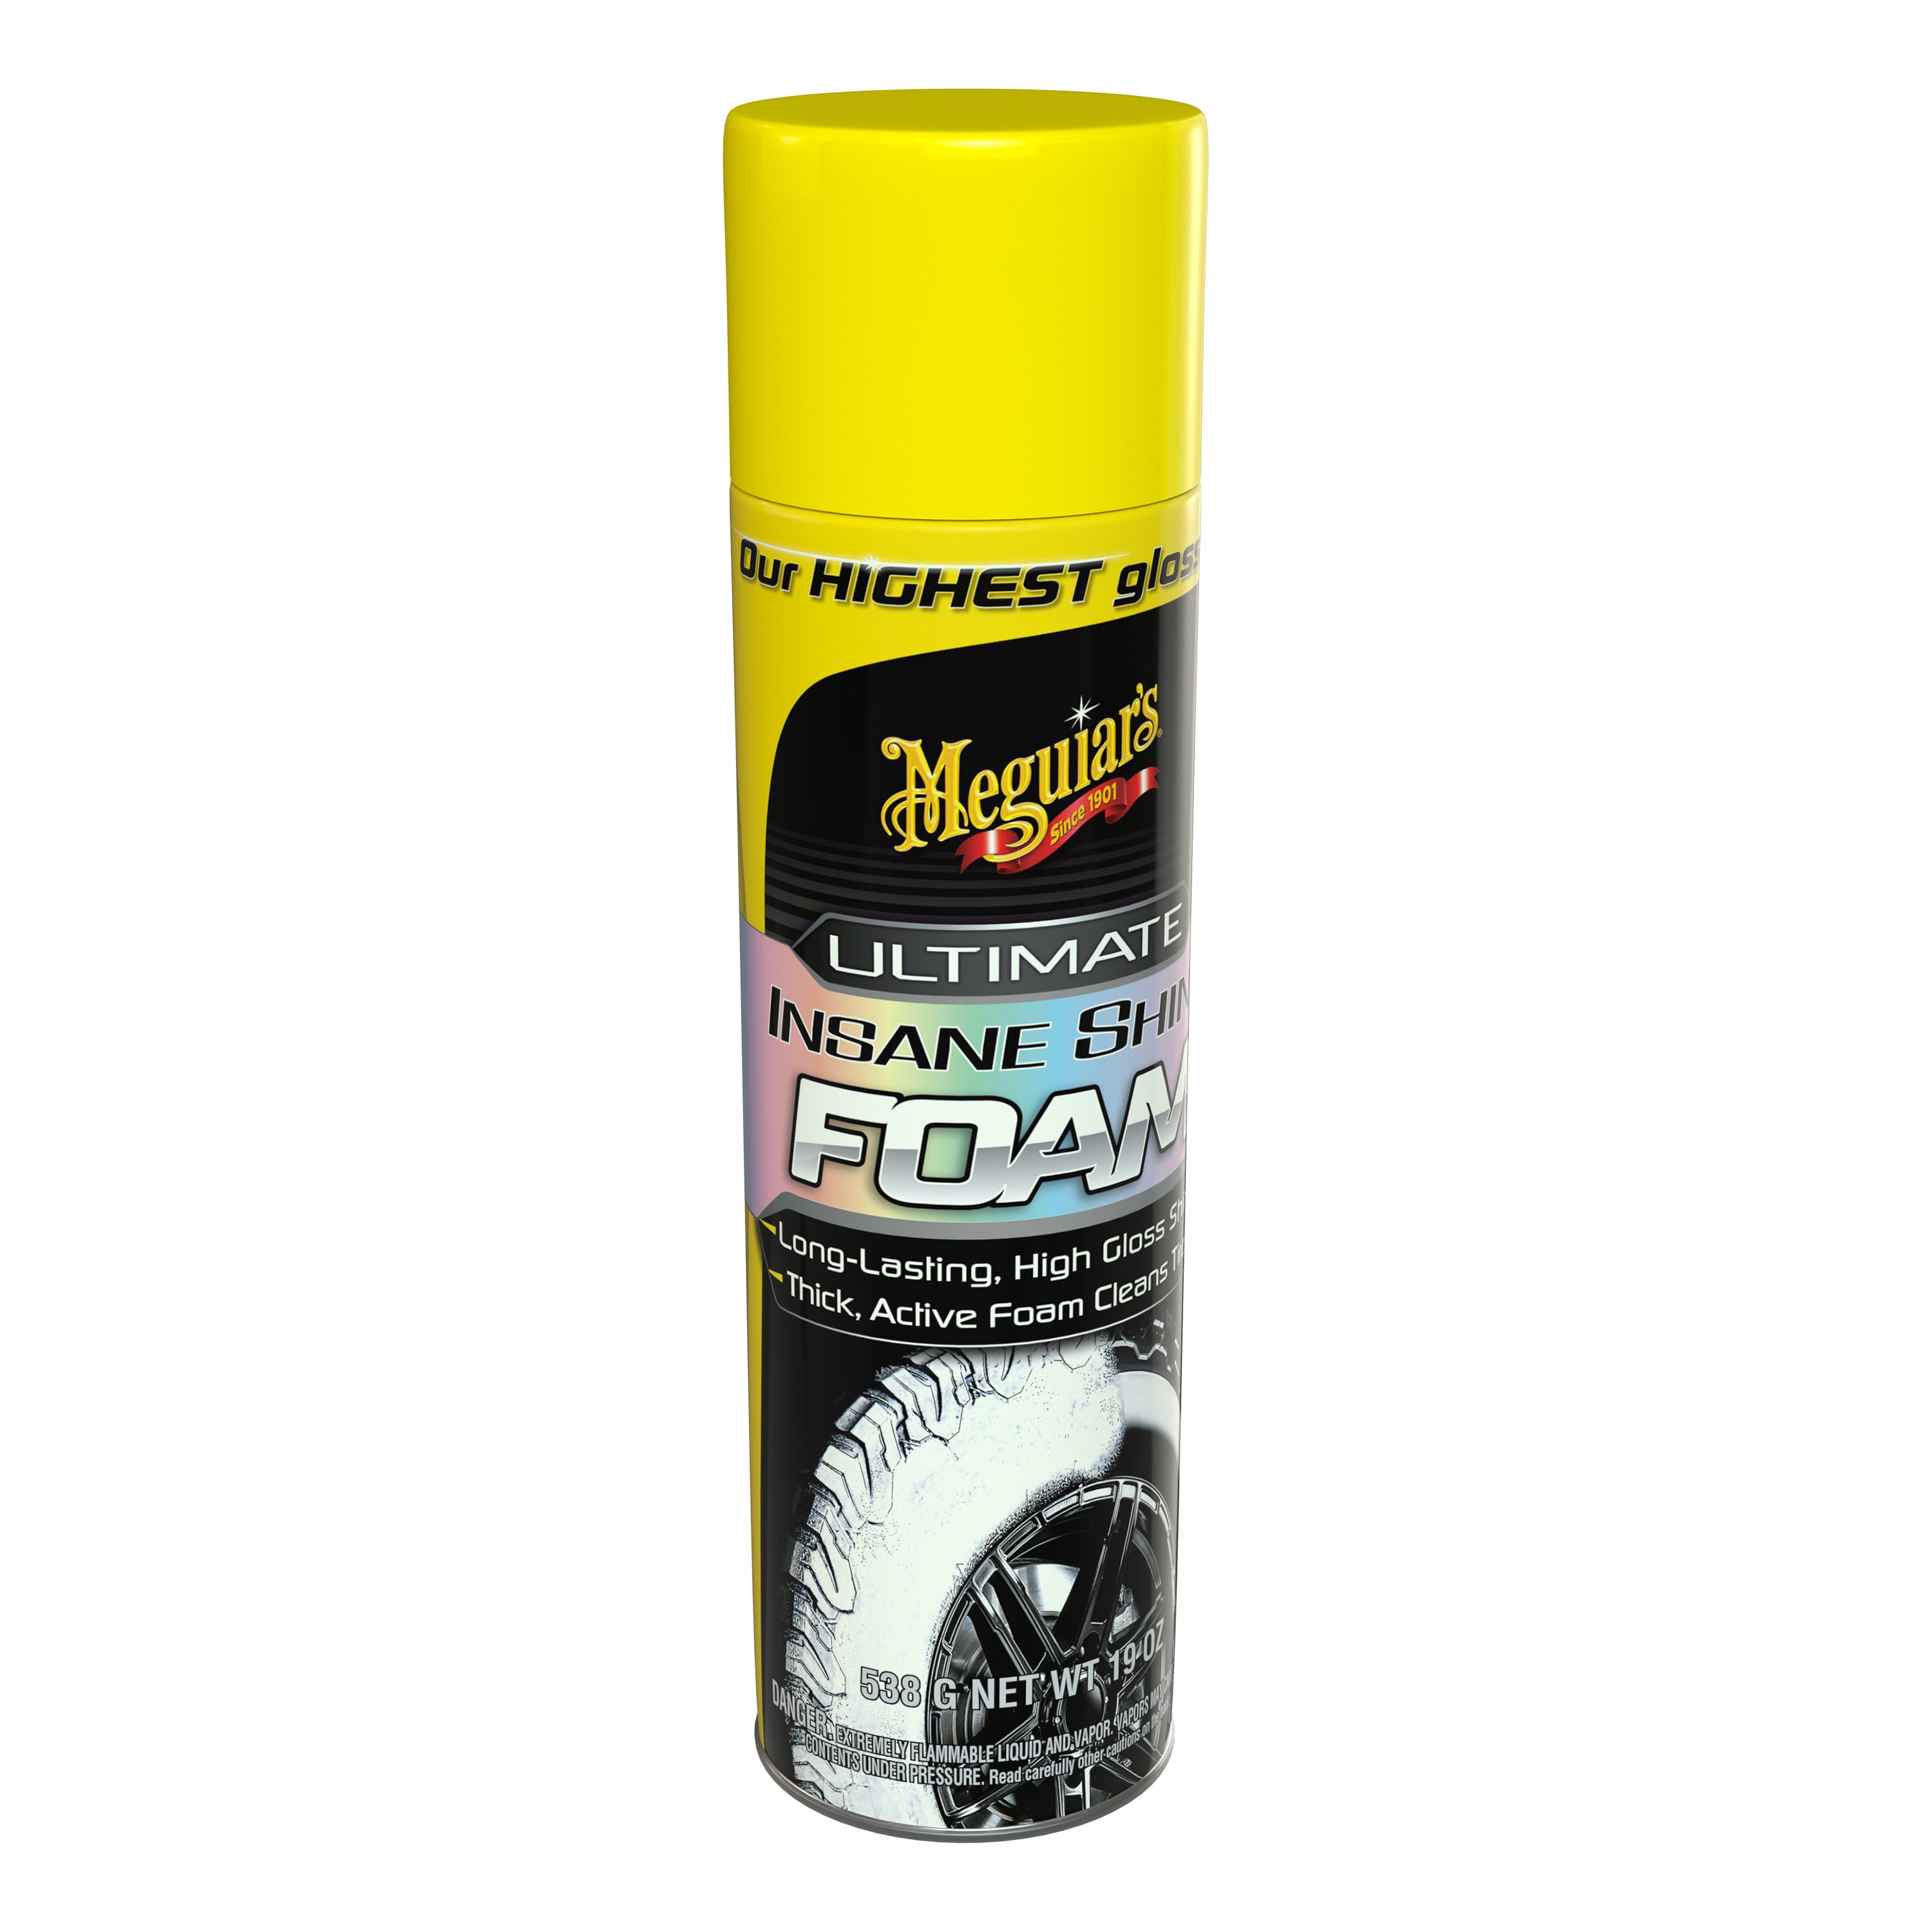 Meguiars Hot Shine Tire Spray is a aerosol spray tire protectant &  dressing. Meguiars leaves a high gloss shine on rubber tires.